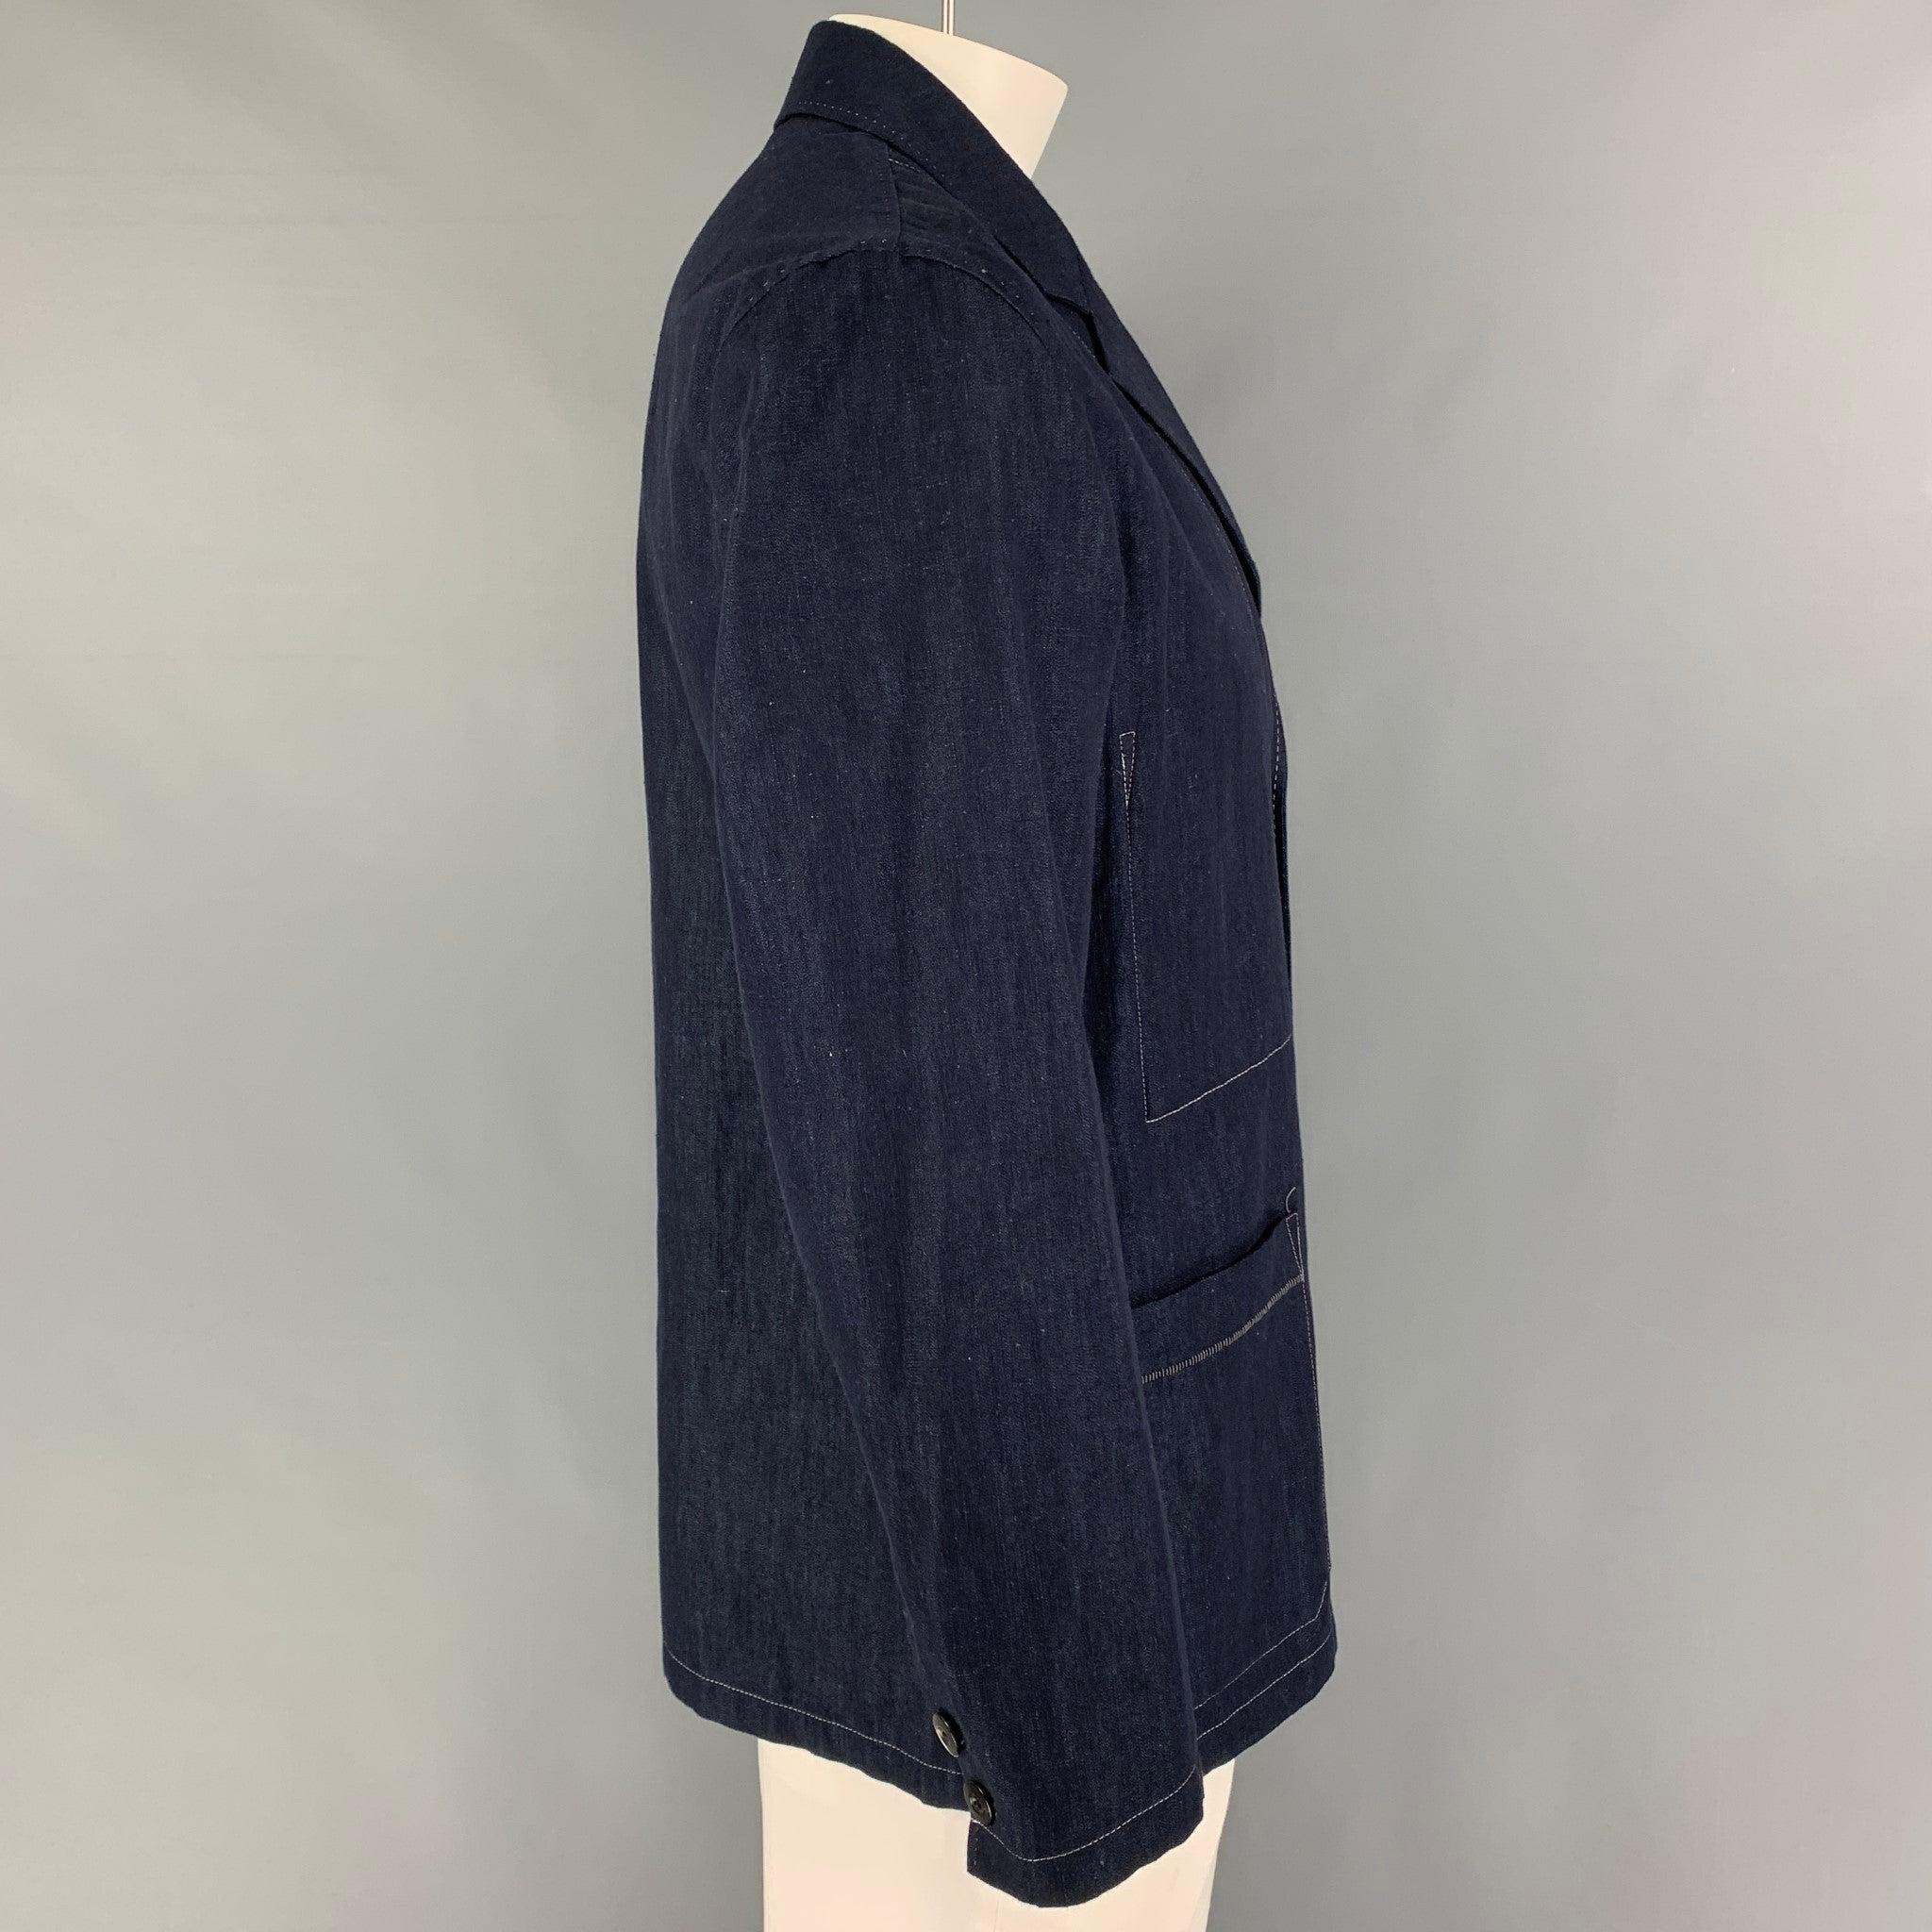 PAUL SMITH sport coat comes in a indigo cotton blend featuring a notch lapel, patch pockets, contrast stitching, and a buttoned closure.
Very Good
Pre-Owned Condition. 

Marked:   L  

Measurements: 
 
Shoulder: 18.5 inches Chest: 44 inches